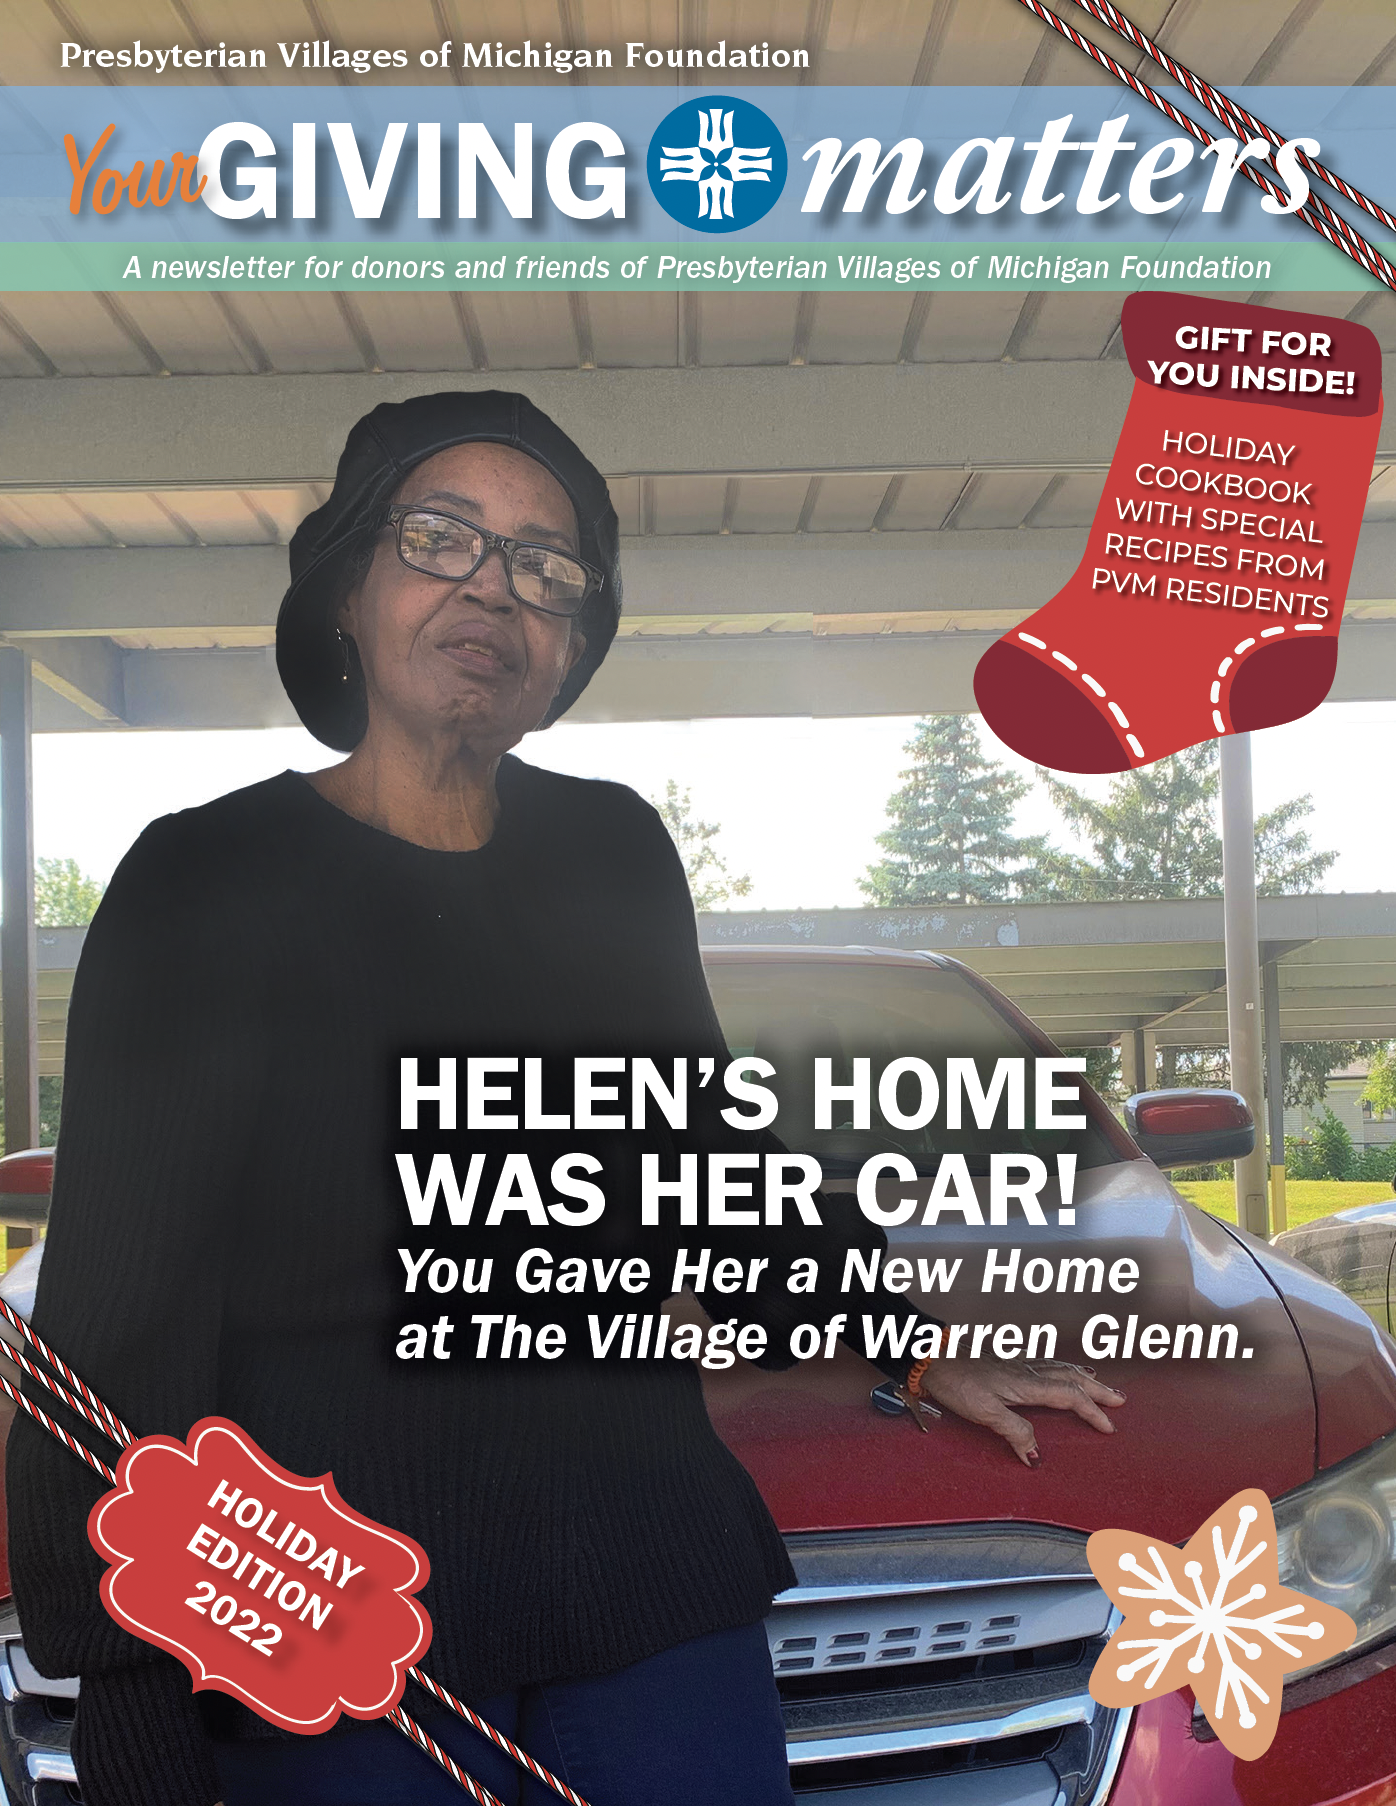 Read the 2022 Holiday edition of Your Giving Matters, featuring Helen, who was living in her car until donors helped her move into the Village of Warren Glenn.